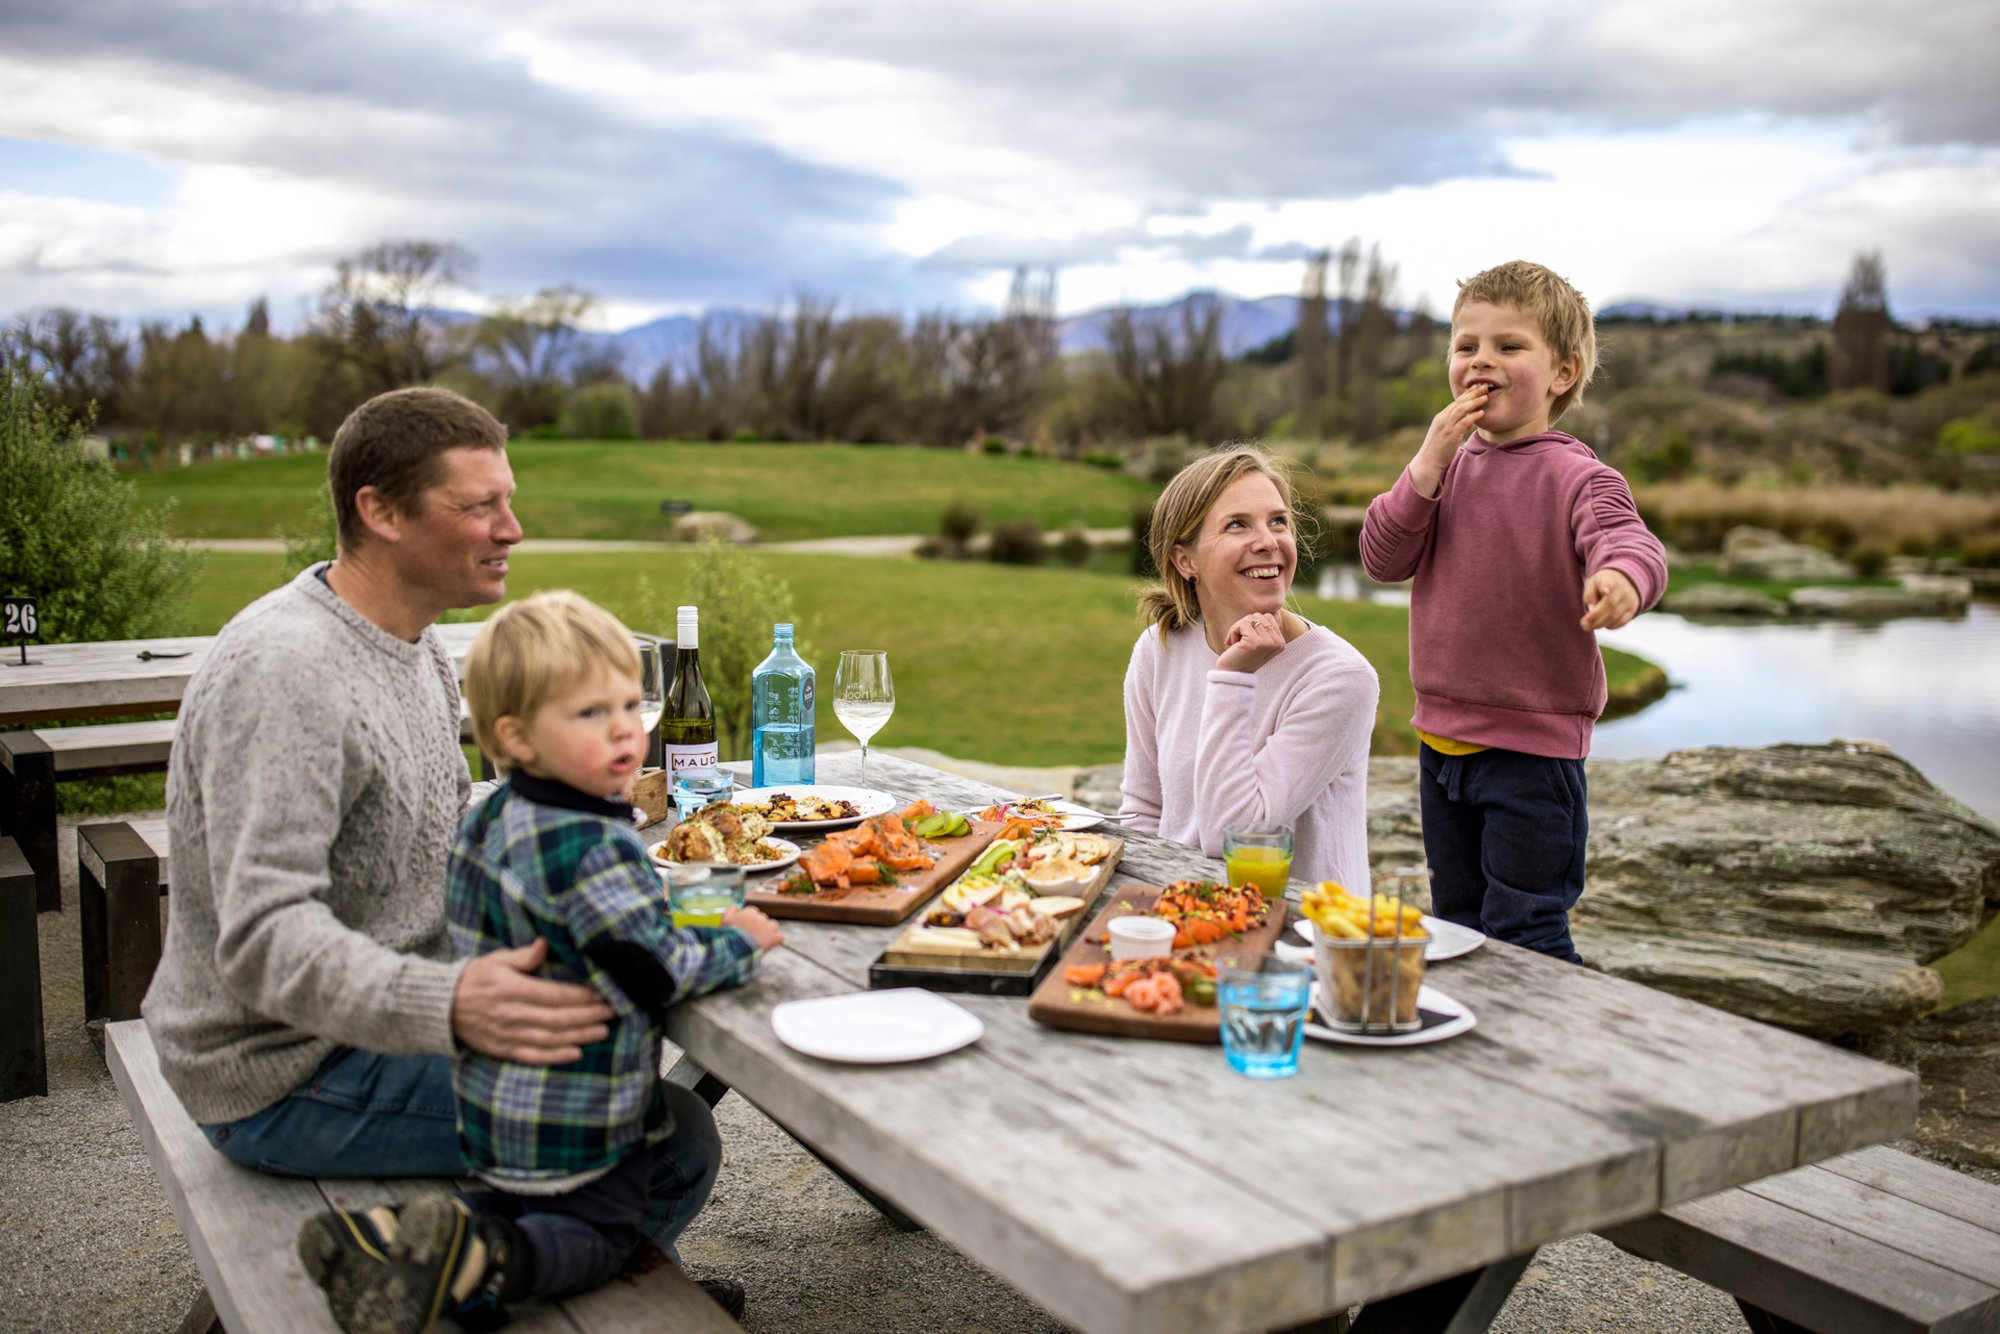 family eating at a picnic table outside grazing platter